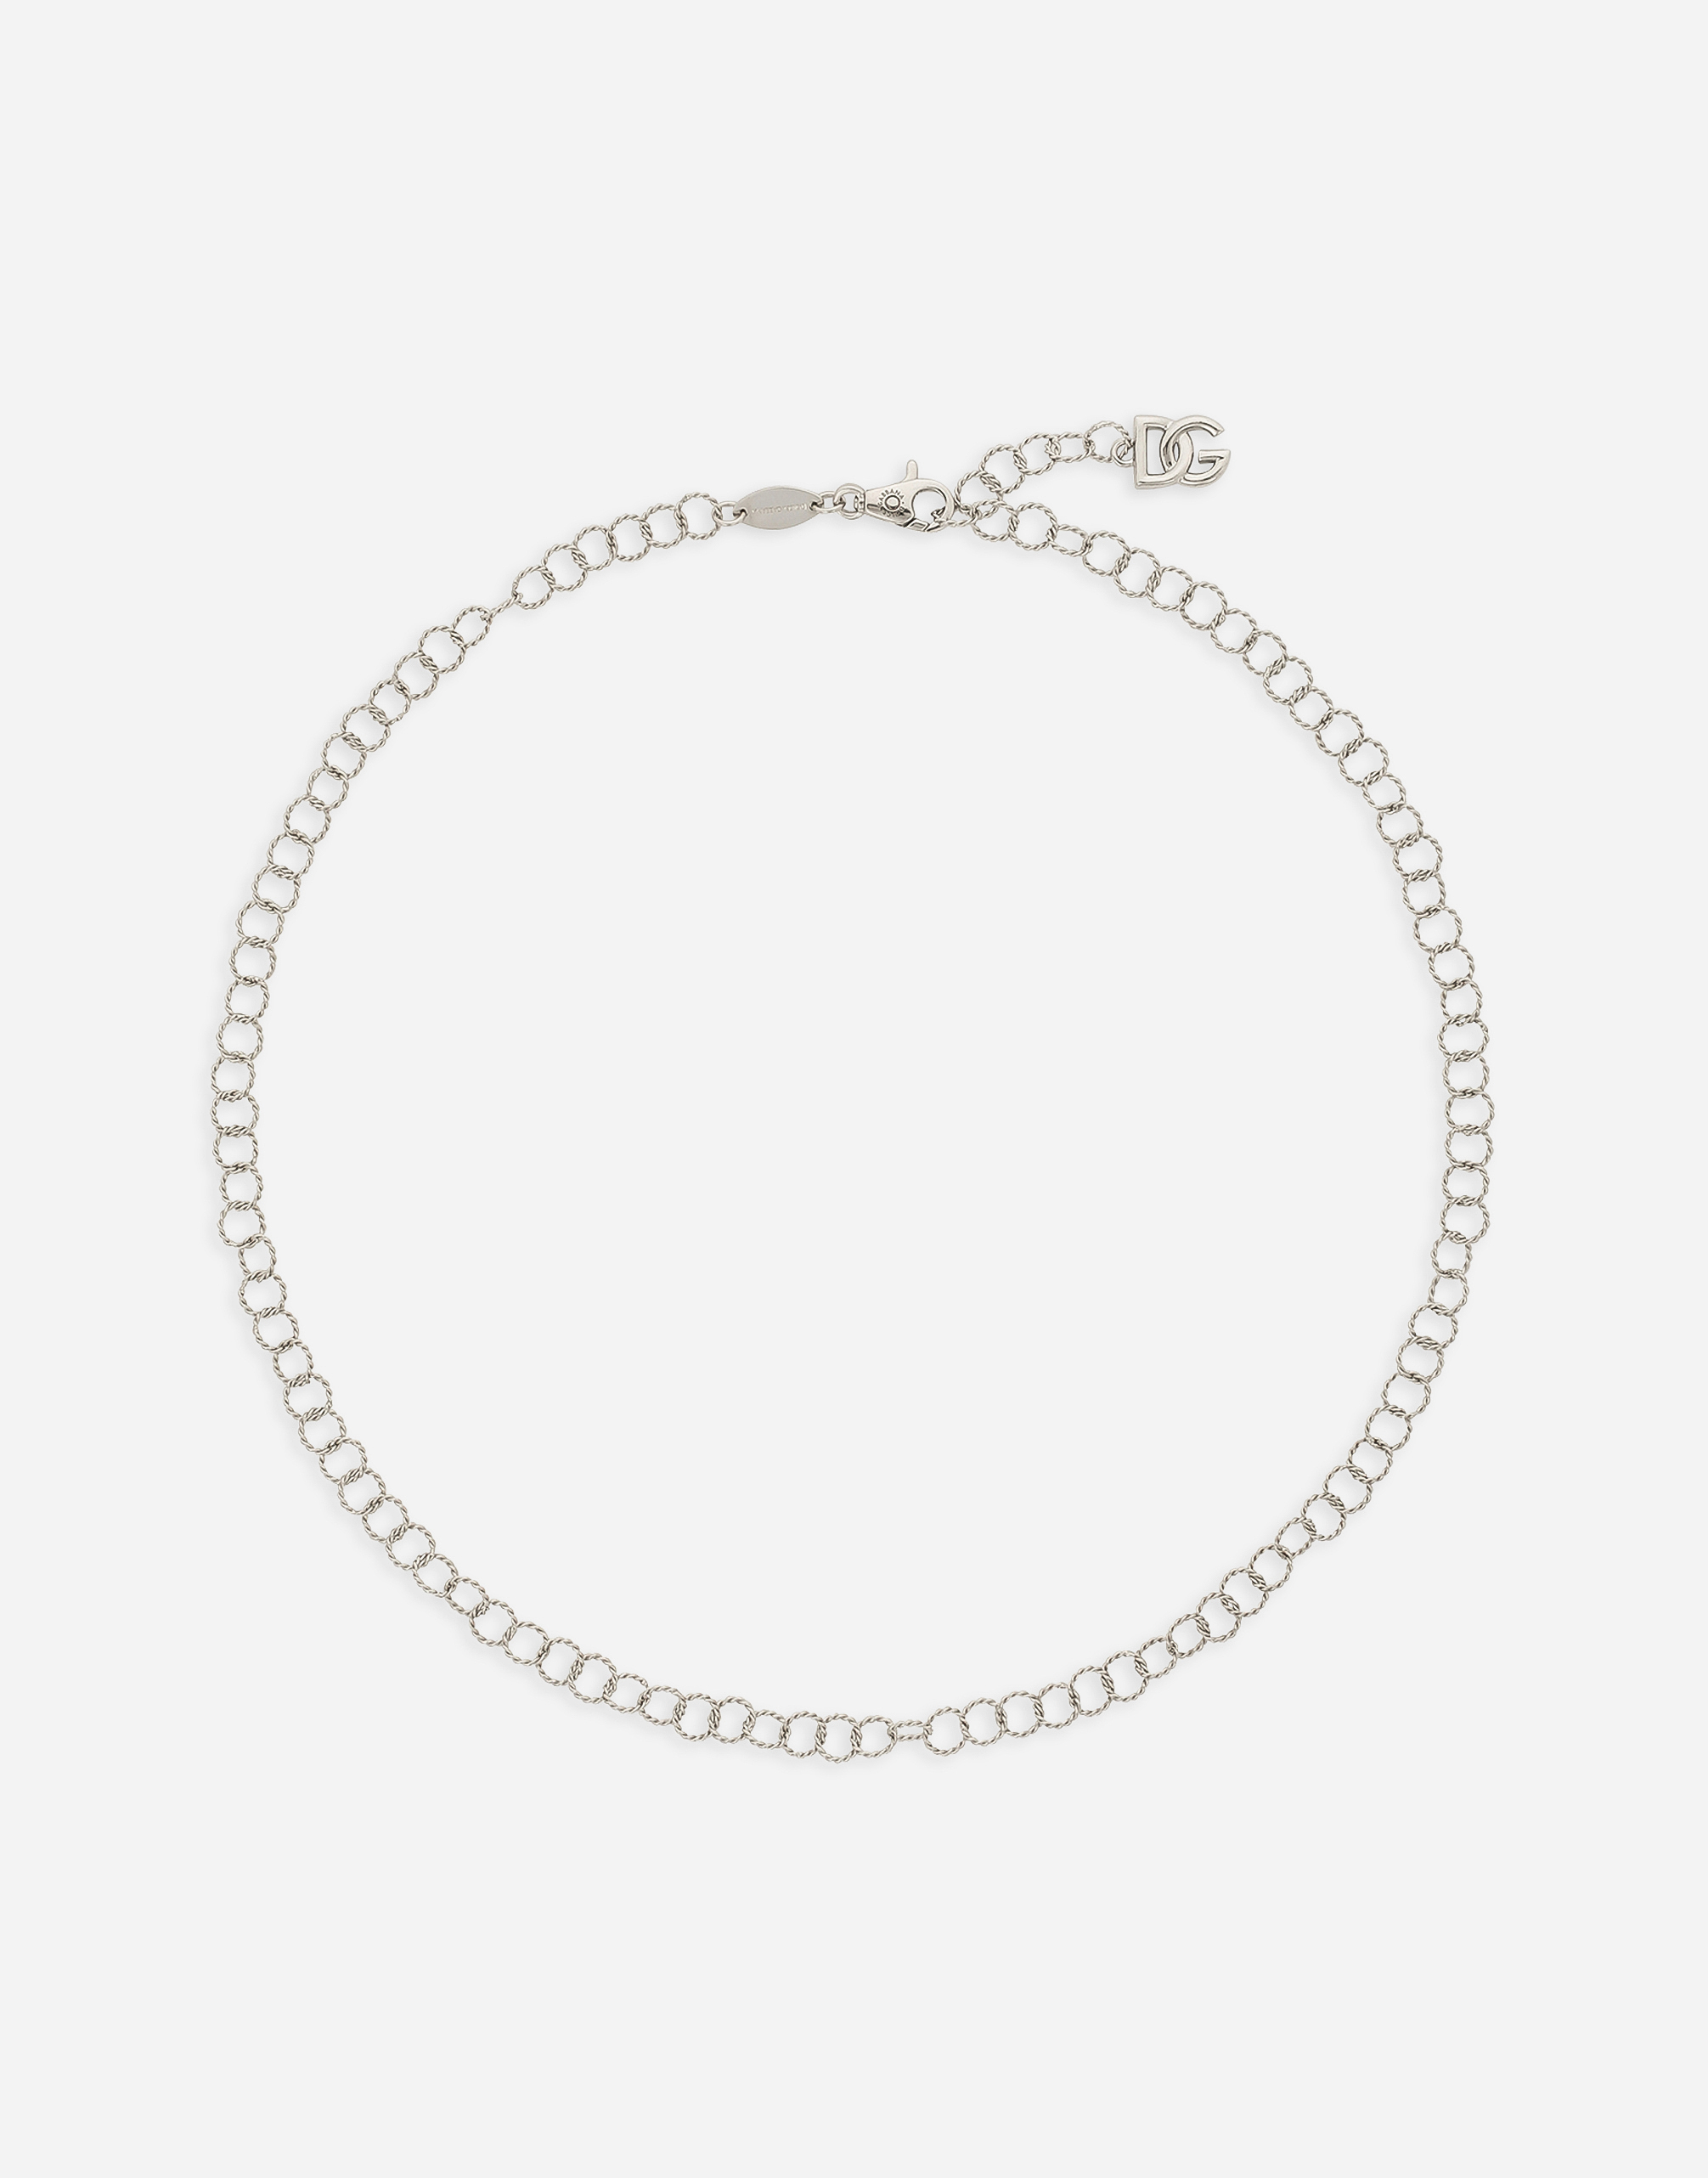 Dolce & Gabbana Twisted Wire Chain Necklace In White Gold 18kt